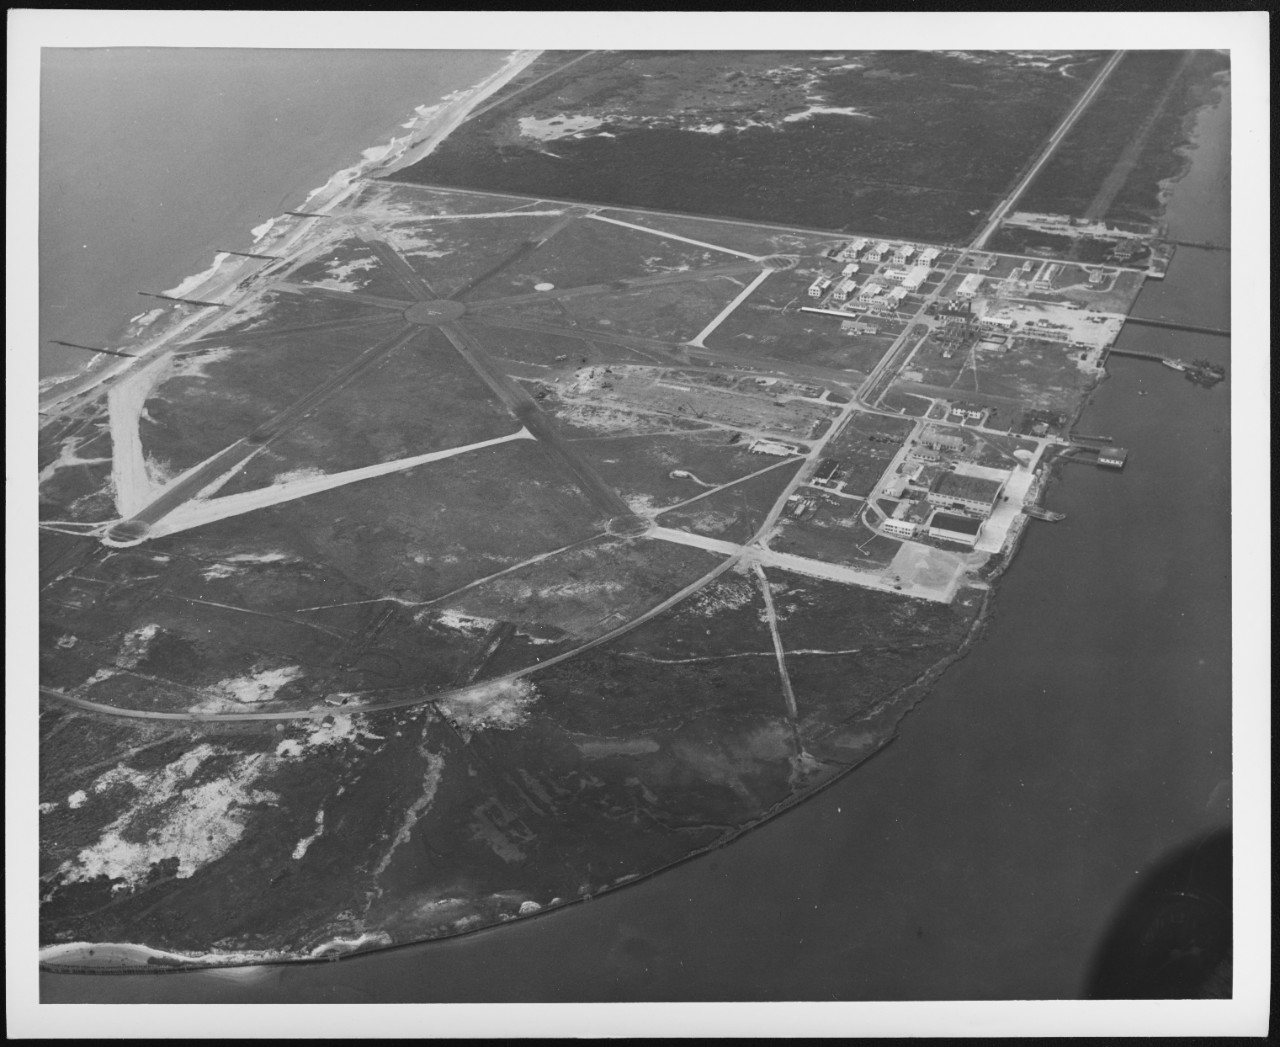 U.S. Naval Air Station, Cape May, New Jersey